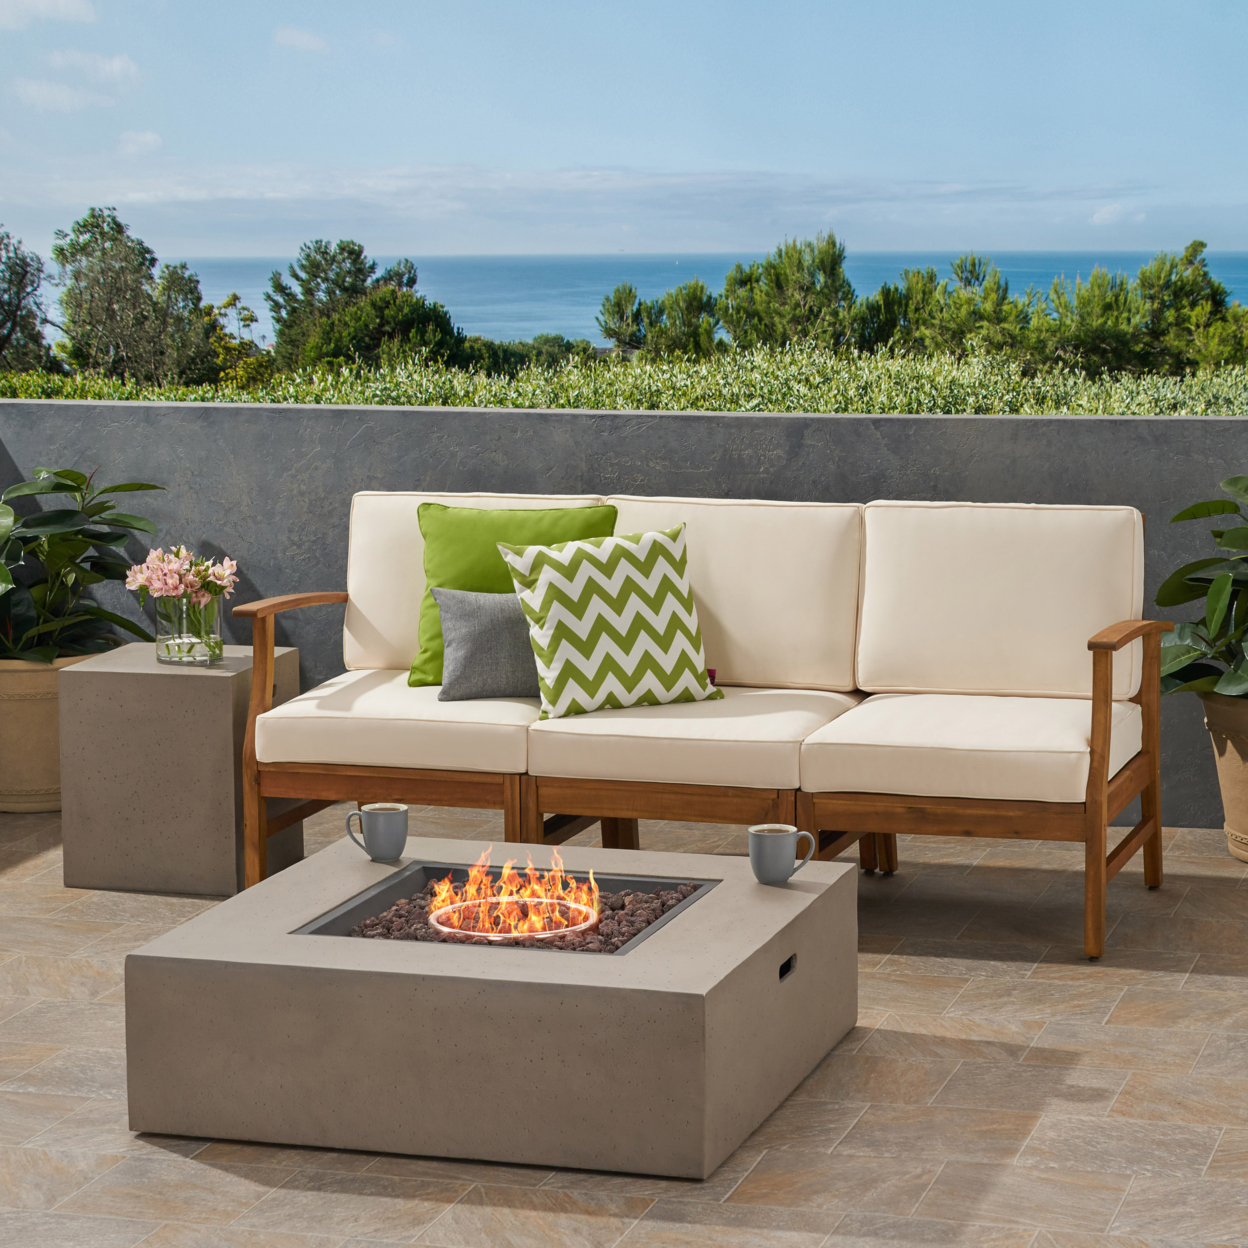 Sydney Outdoor 3 Seater Acacia Wood Sofa Set With Rectangular Fire Table And Tank Holder - Teak + Creme + Light Gray